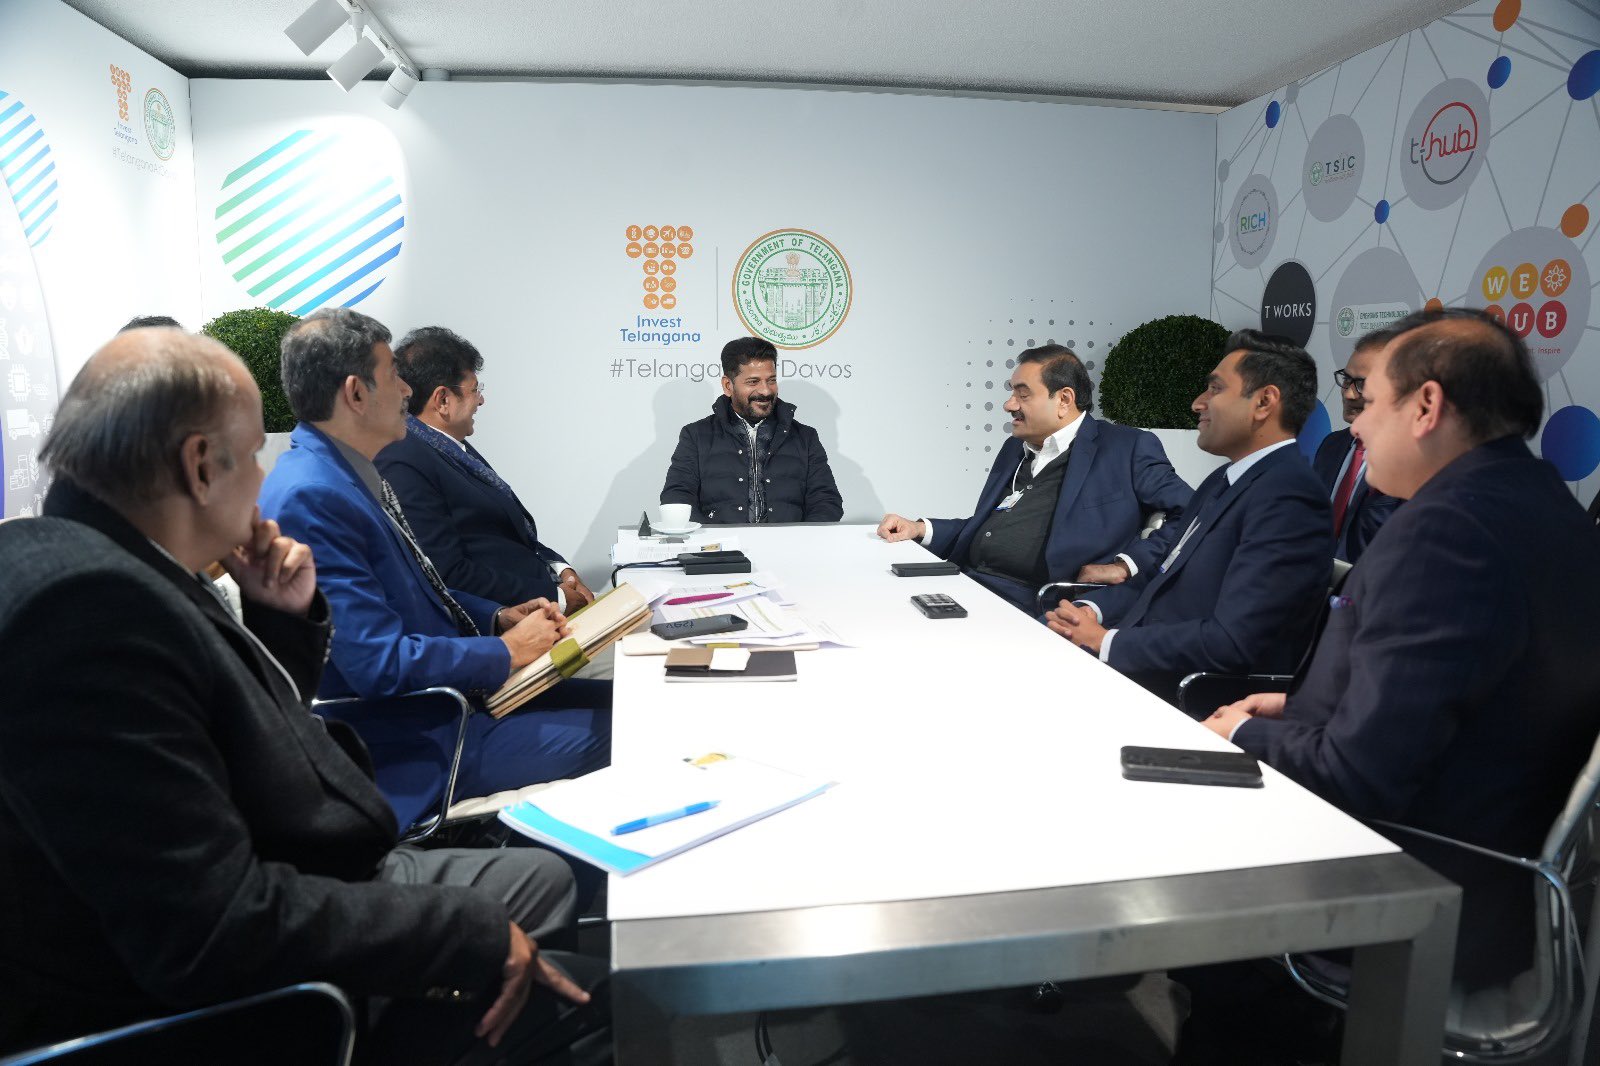 Big investment to Telangana from Adani trip to Davos